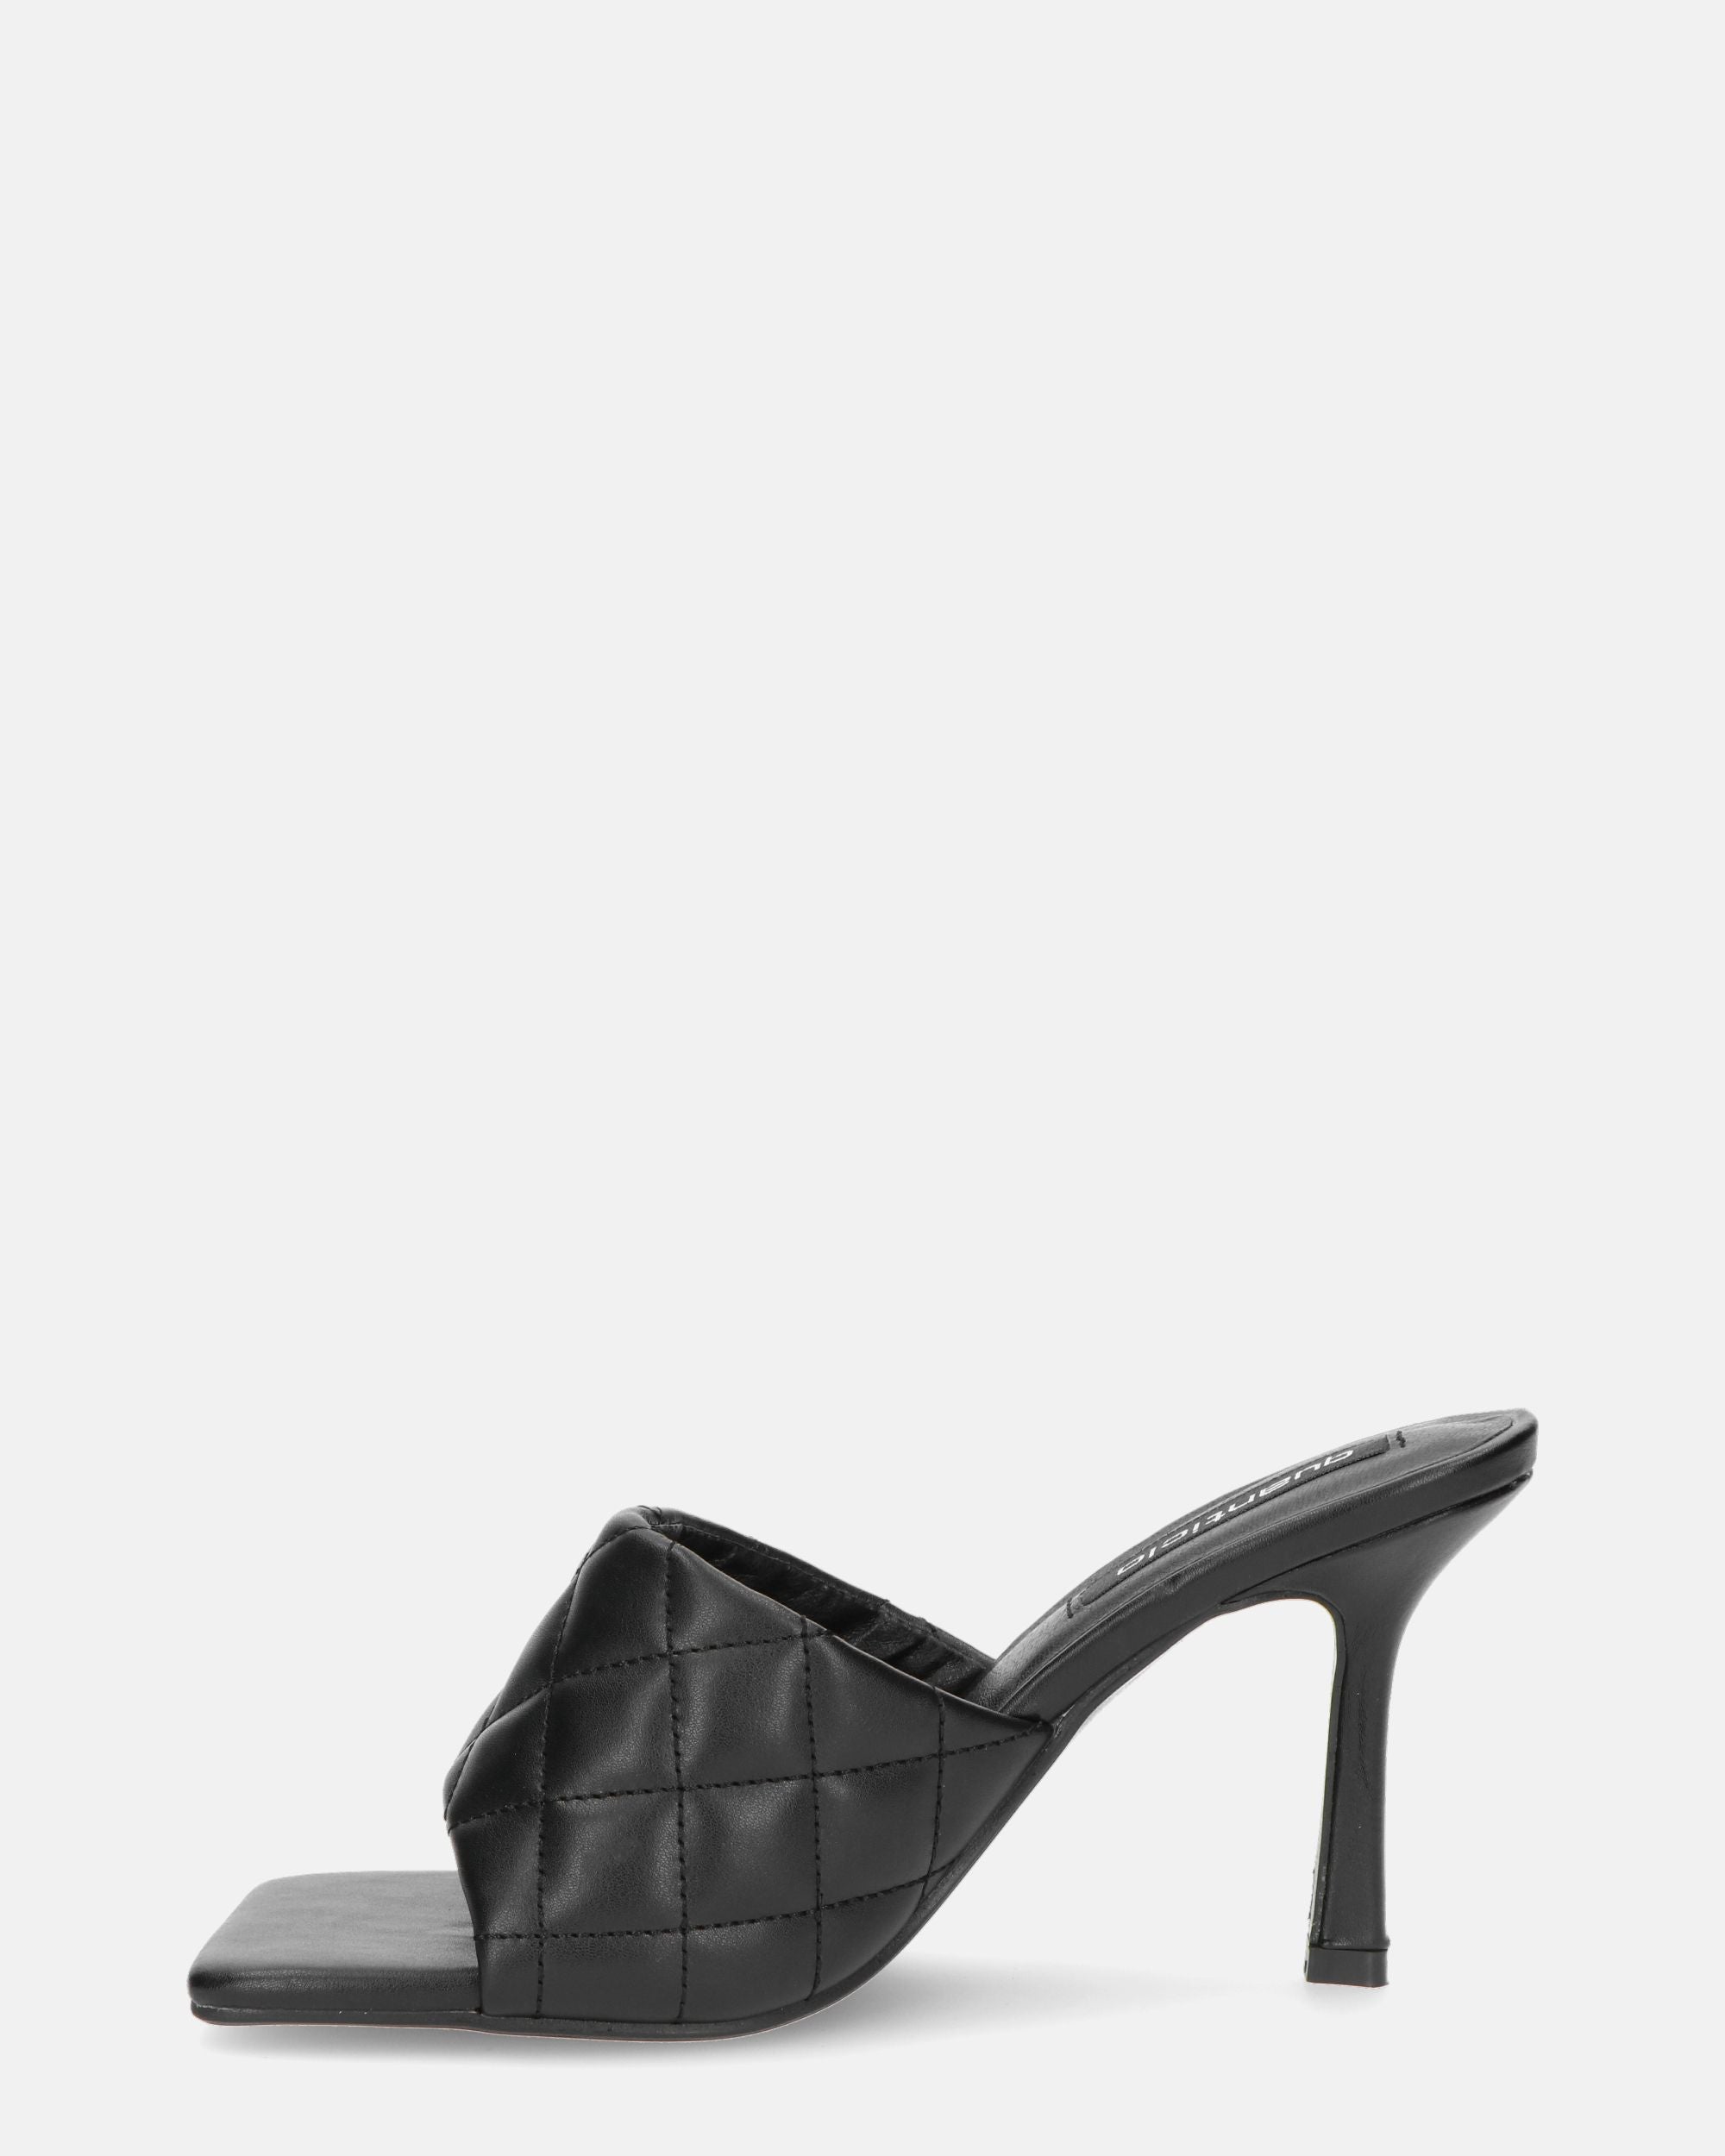 GABY - black stiletto heel with band and stitching